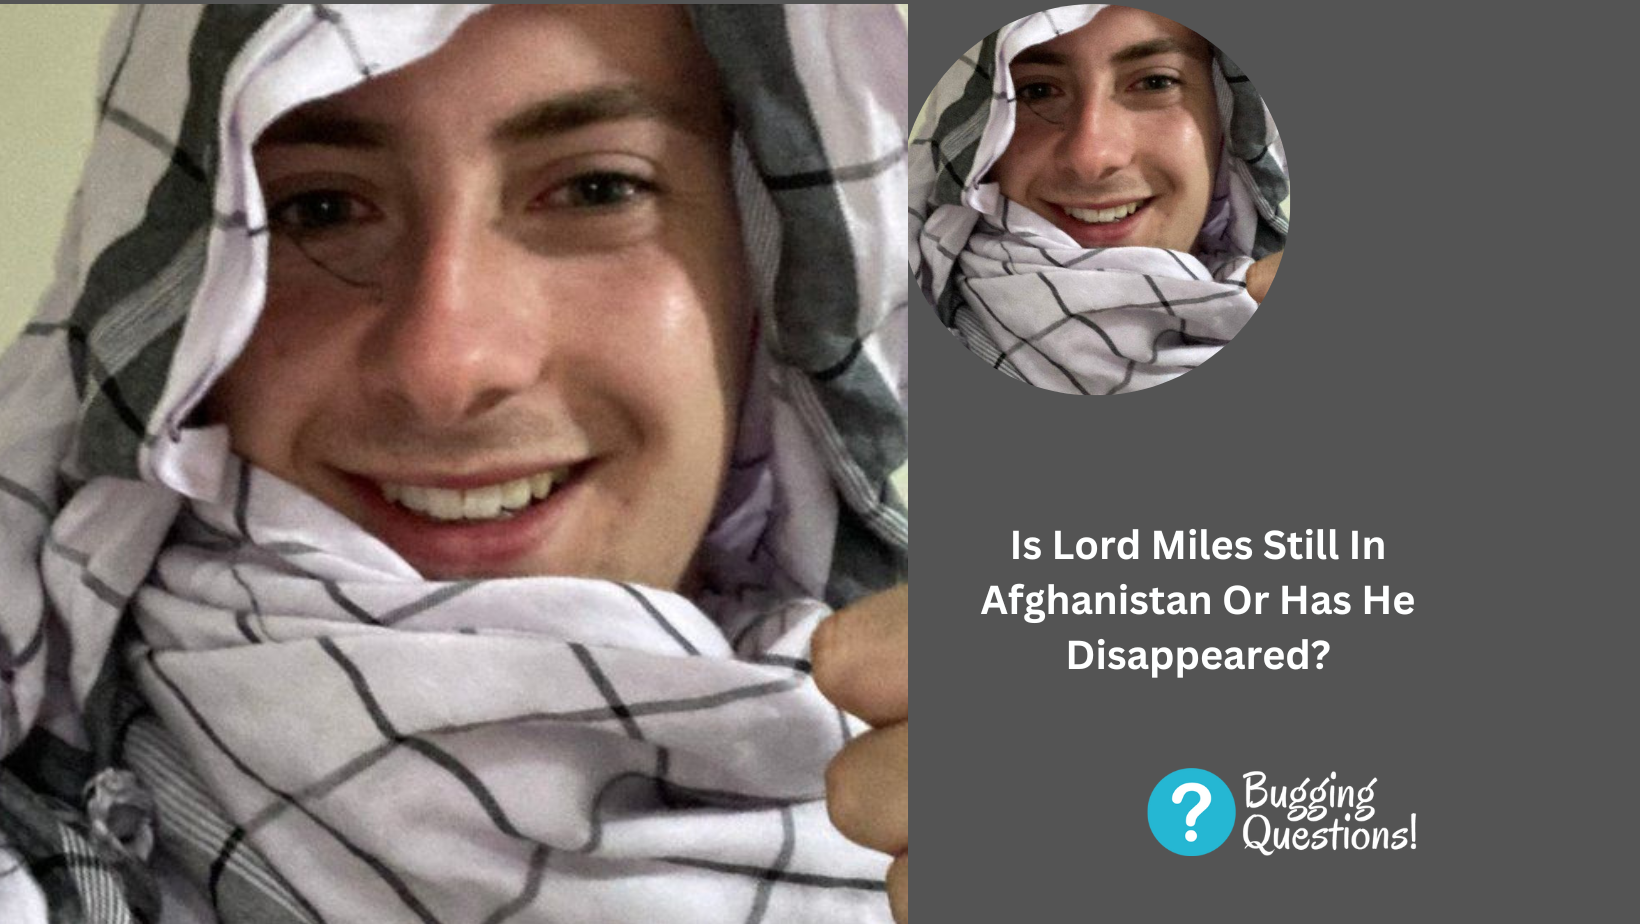 Is Lord Miles Still In Afghanistan Or Has He Disappeared?